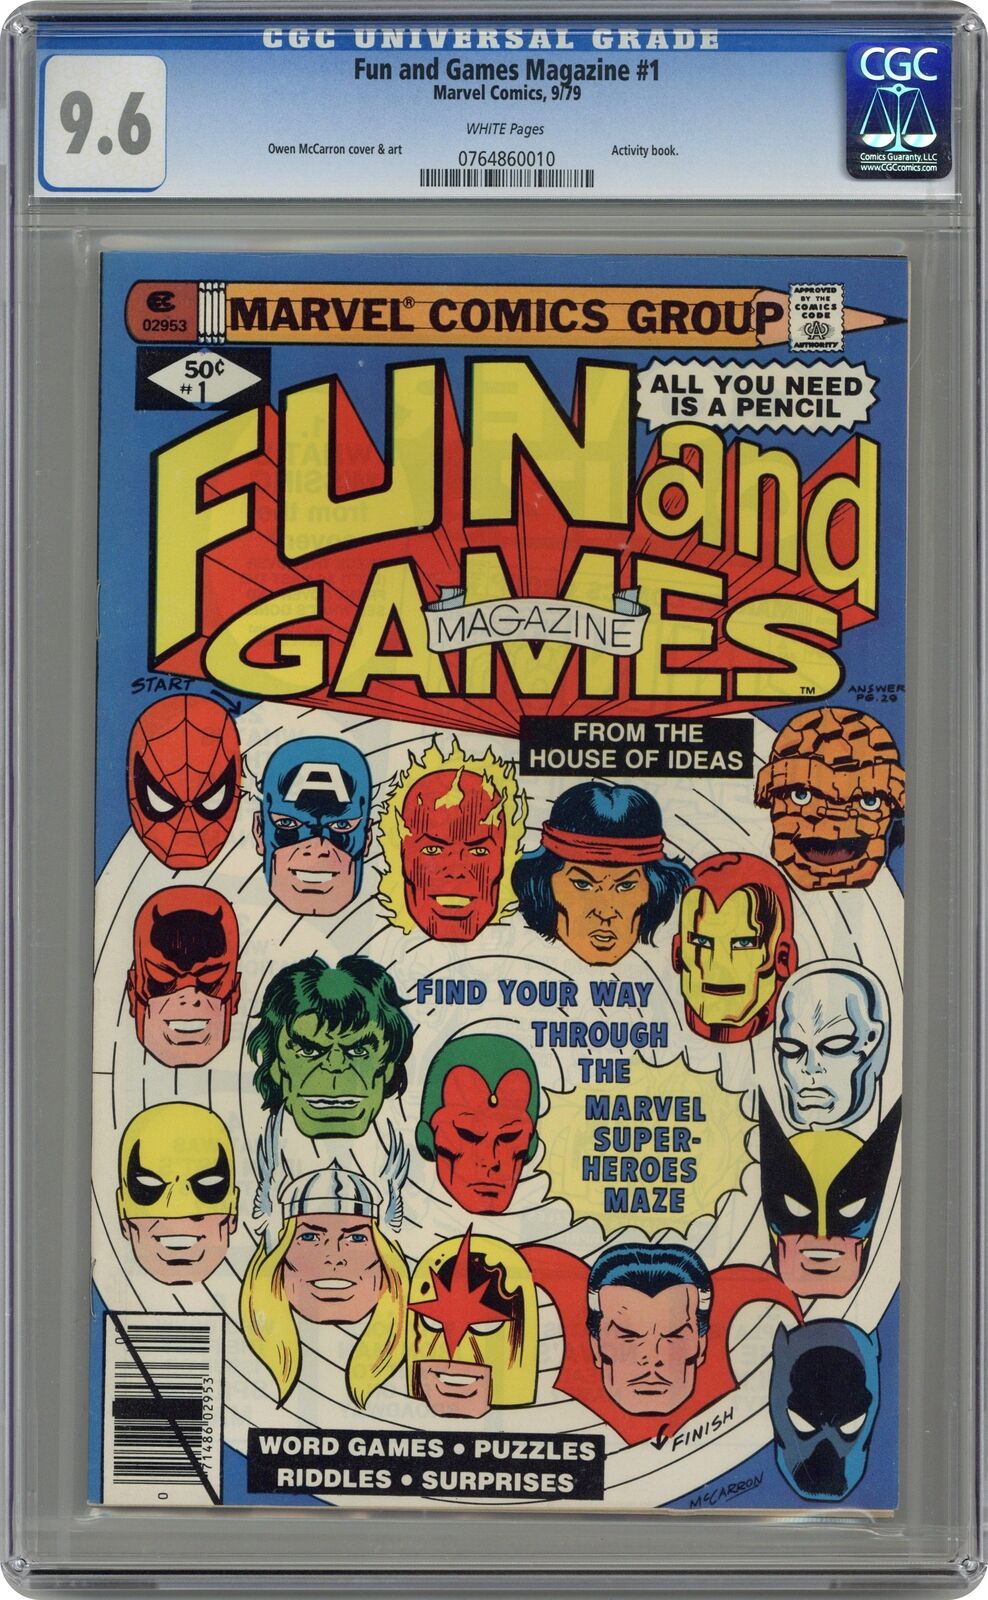 Marvel Fun and Games #1 CGC 9.6 1979 0764860010